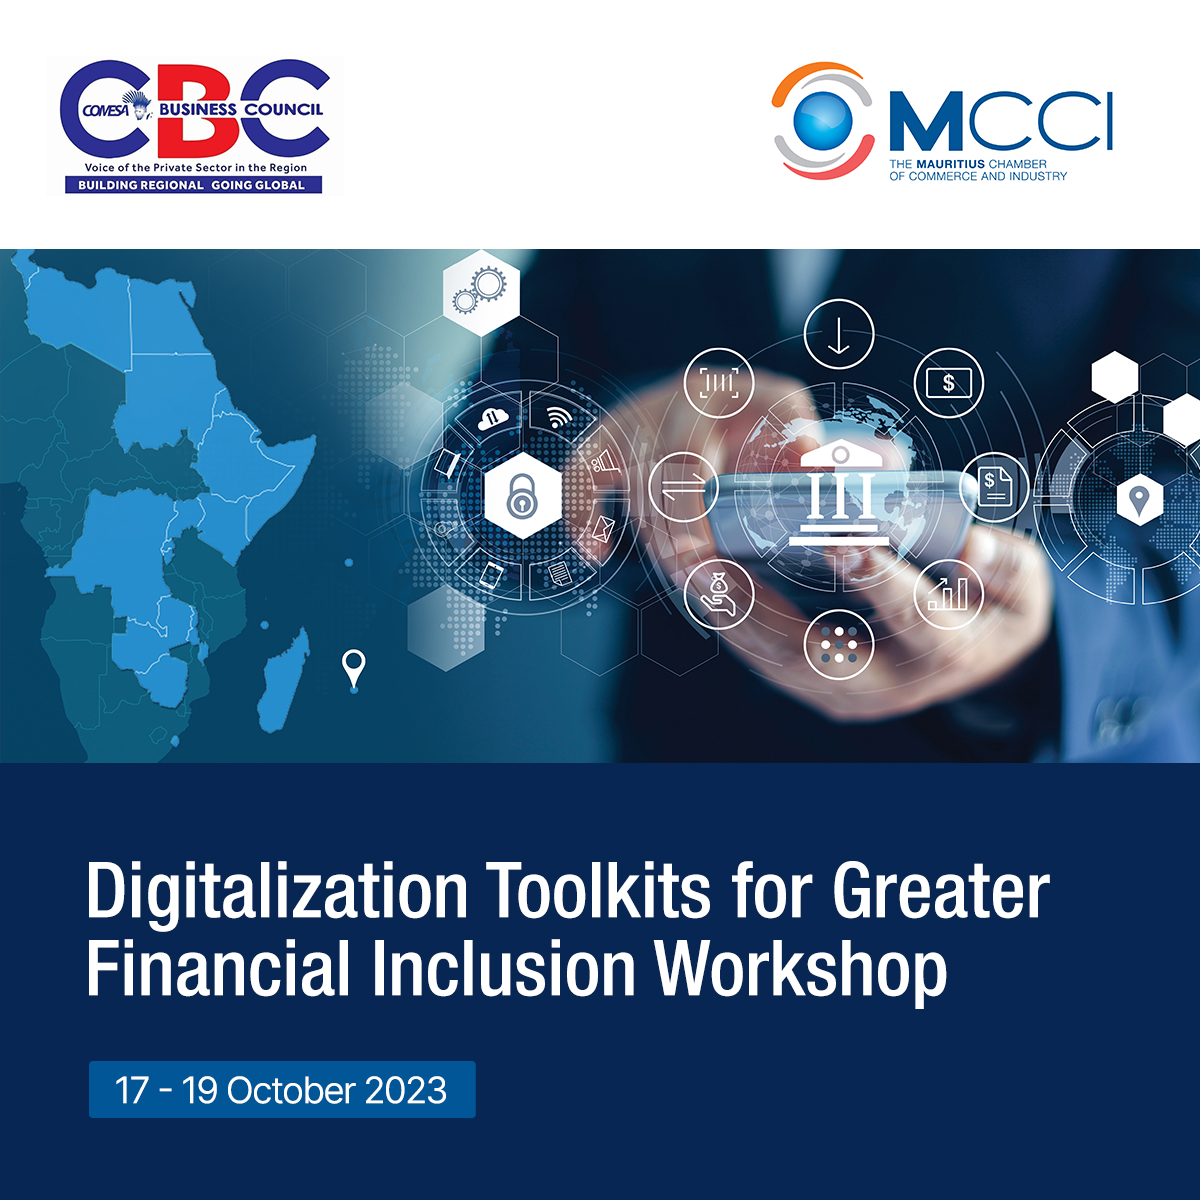 CBC's #DigitalFinancialInclusion Workshop is on the horizon! In collaboration with #MCCI this 3day event will empower +50 #MSMEs 4greater #financialinclusion, boosting regional #trade & facilitating #crossborder transactions. Stay tuned for updates from this transformative event!